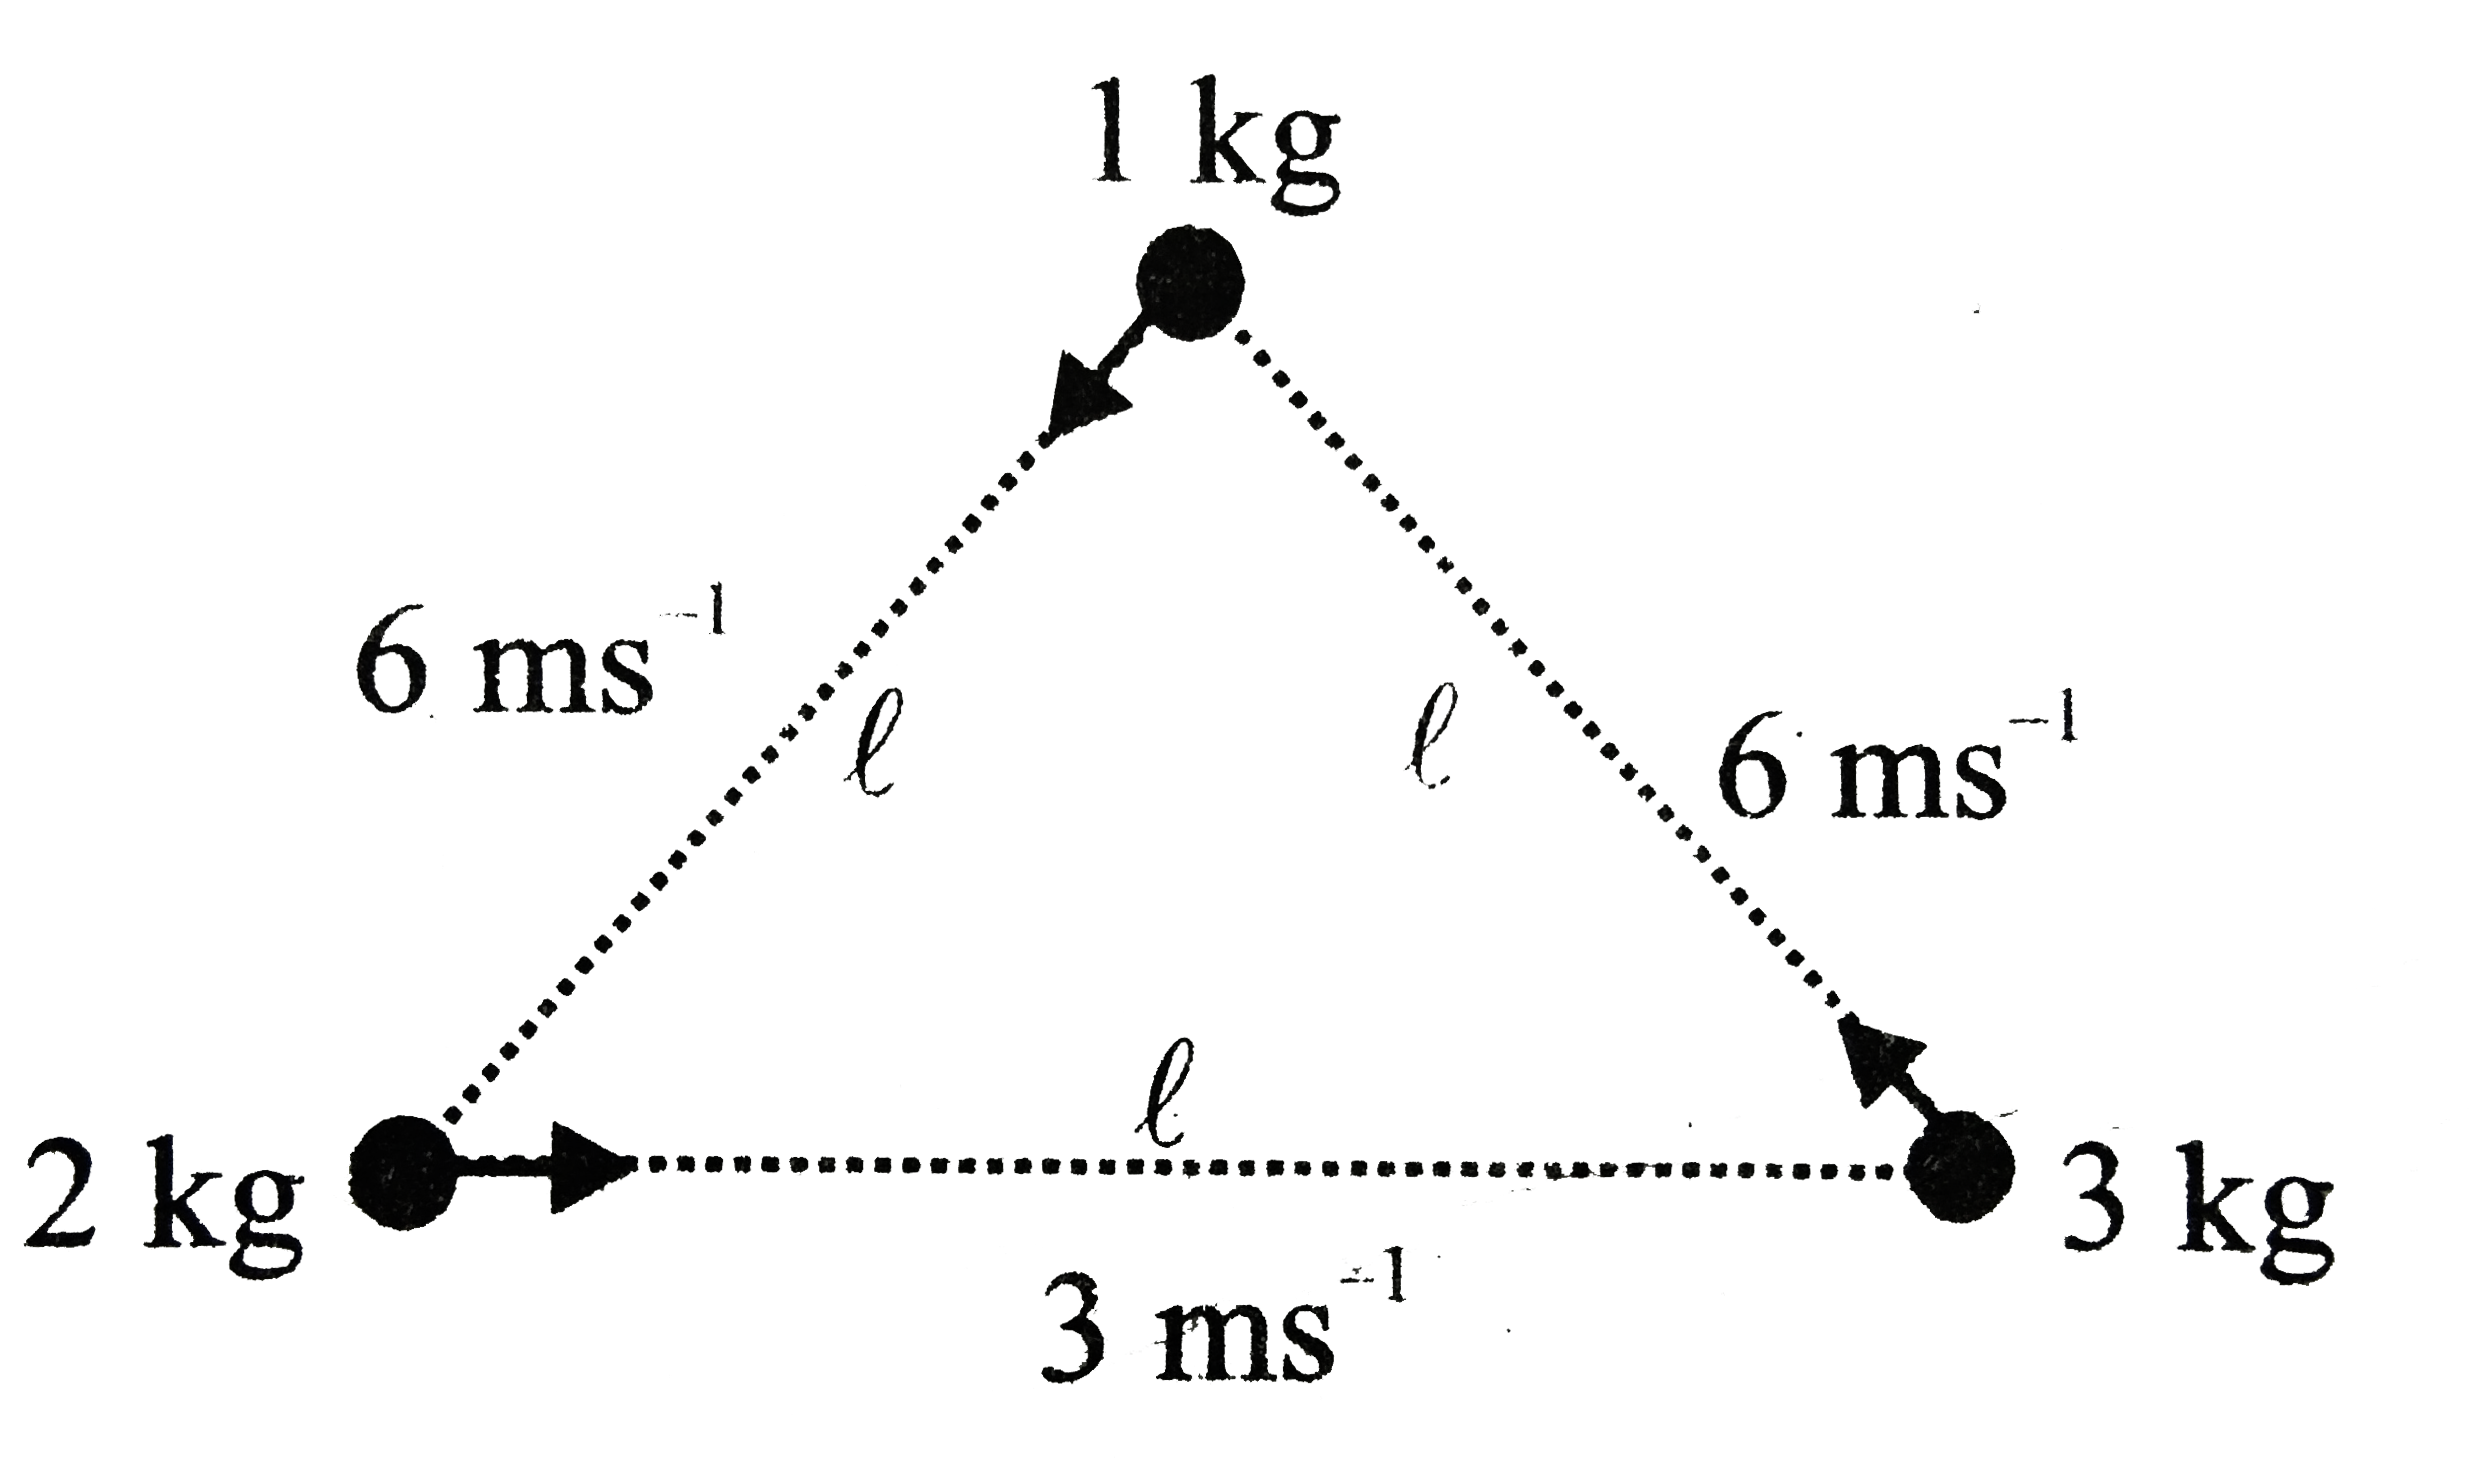 Three particles of masses 1 kg, 2 kg and 3 kg are situated at the corners of an equilateral triangle move at speed 6ms^(-1), 3ms^(-1) and 2ms^(-1) respectively. Each particle maintains a direction towards the particles at the next corners symmetrically. Find velocity of CM of the system at this instant